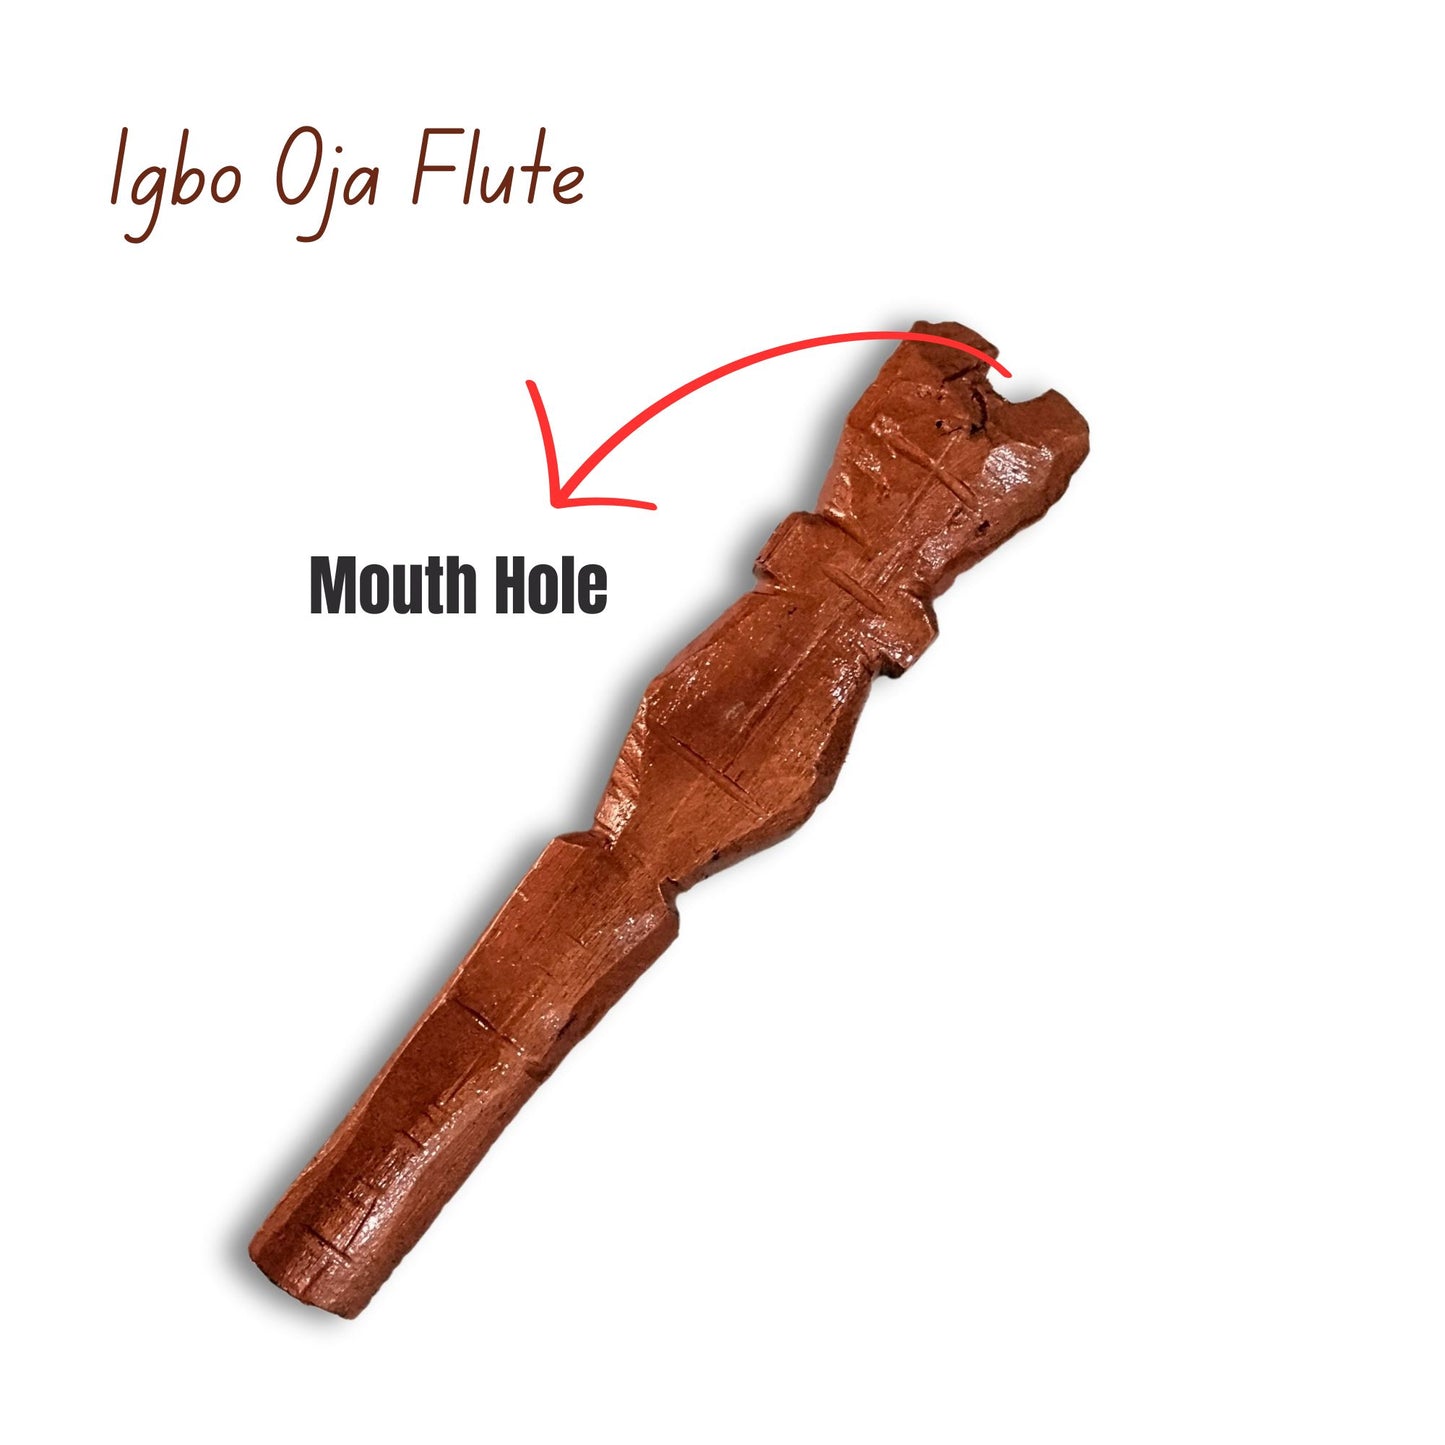 Traditional Flute, African Musical Instrument #2 Igbo Wooden Oja